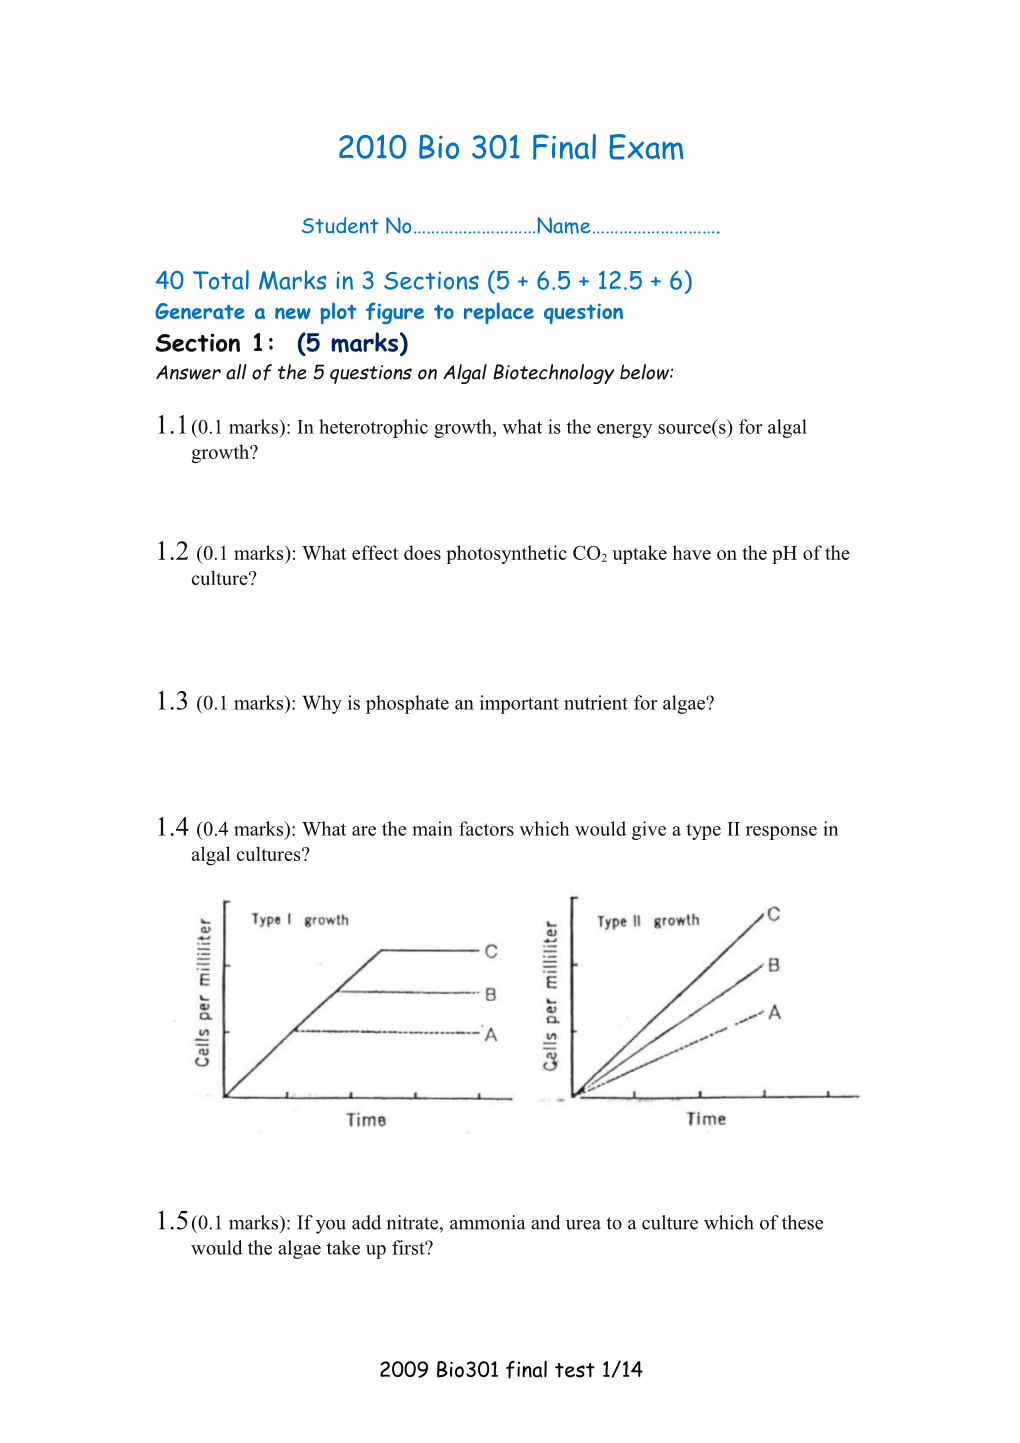 Generate a New Plot Figure to Replace Question